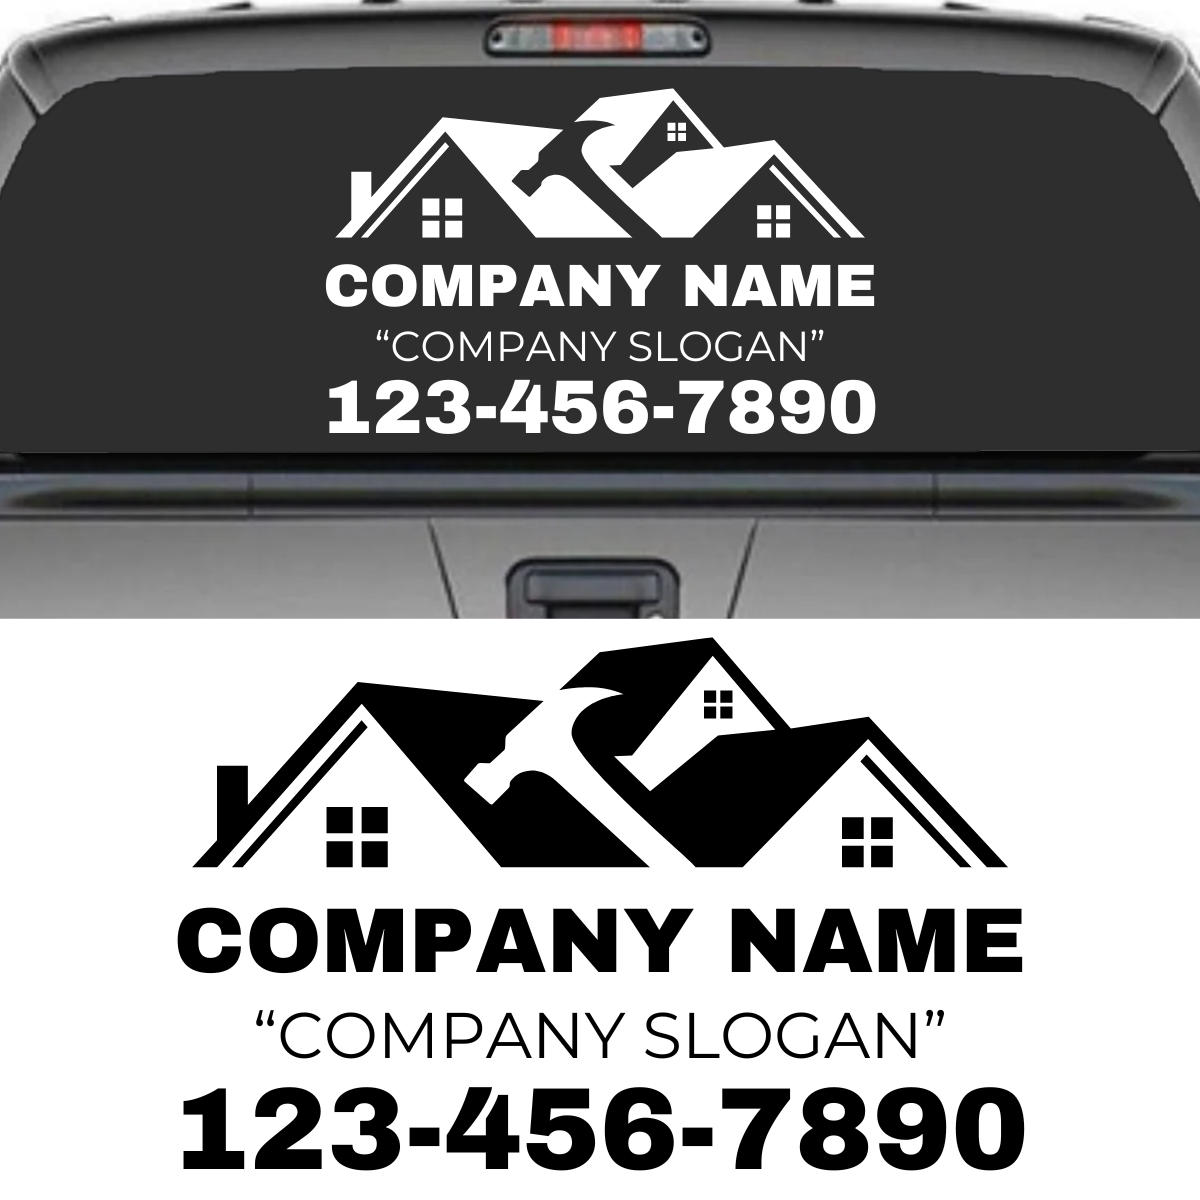 Premium Roofing Vehicle Decal On Truck